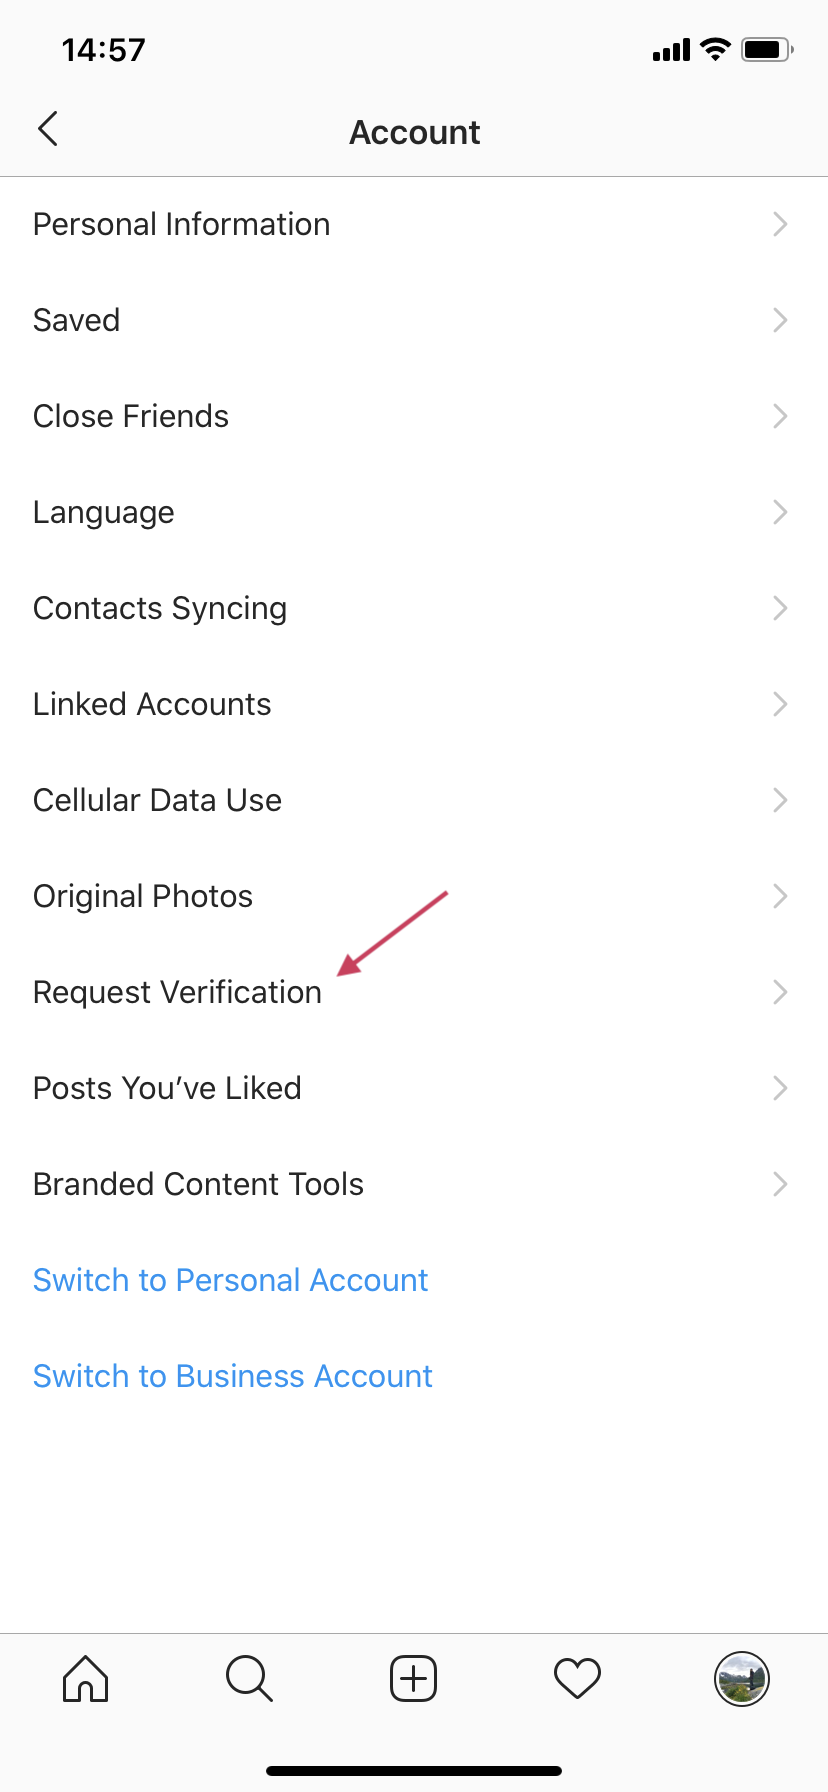 How to Verify Your Instagram Account